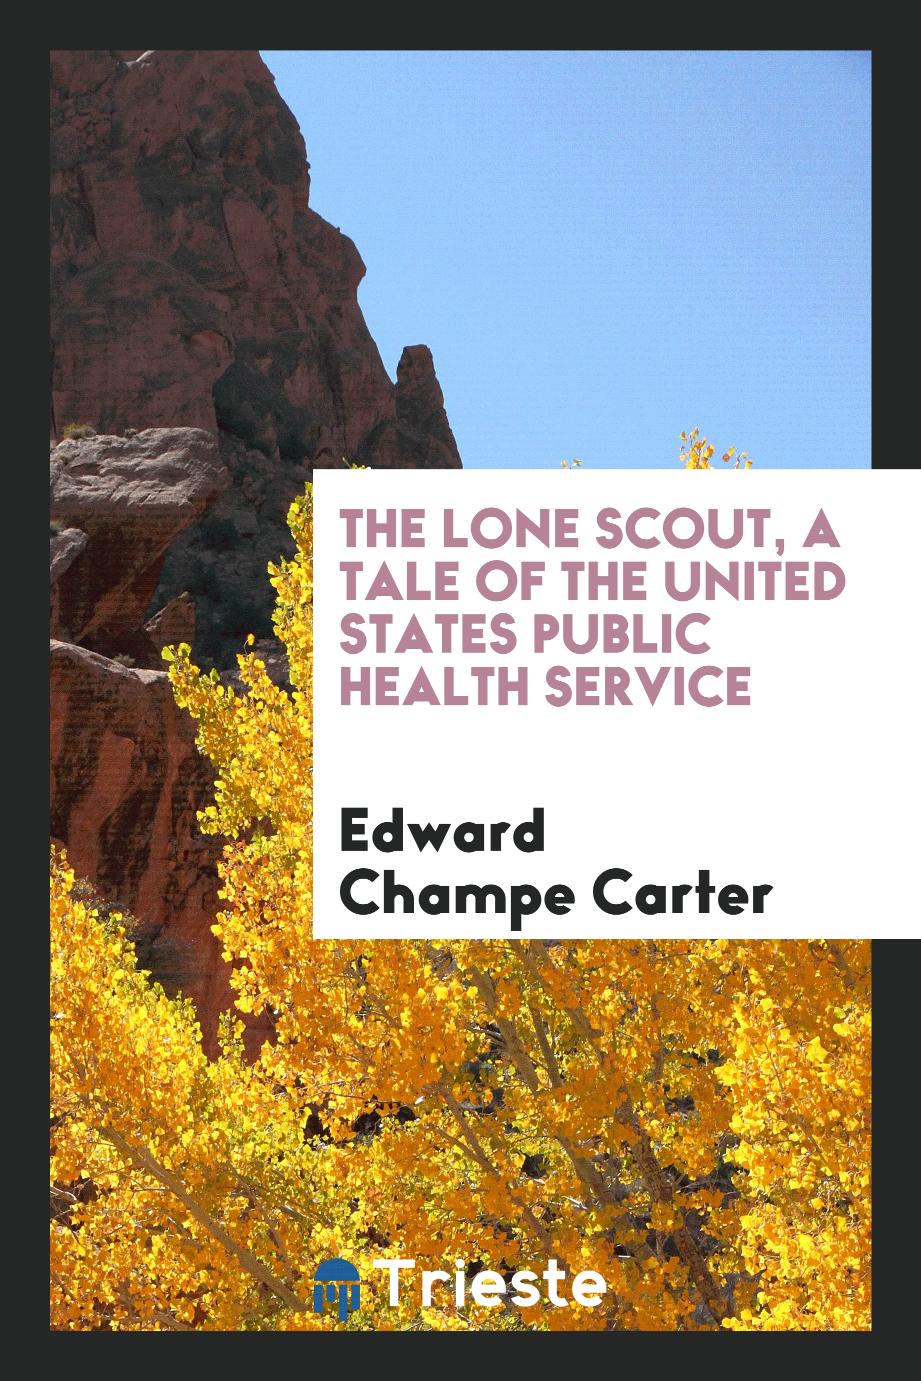 The lone scout, a tale of the United States Public health service